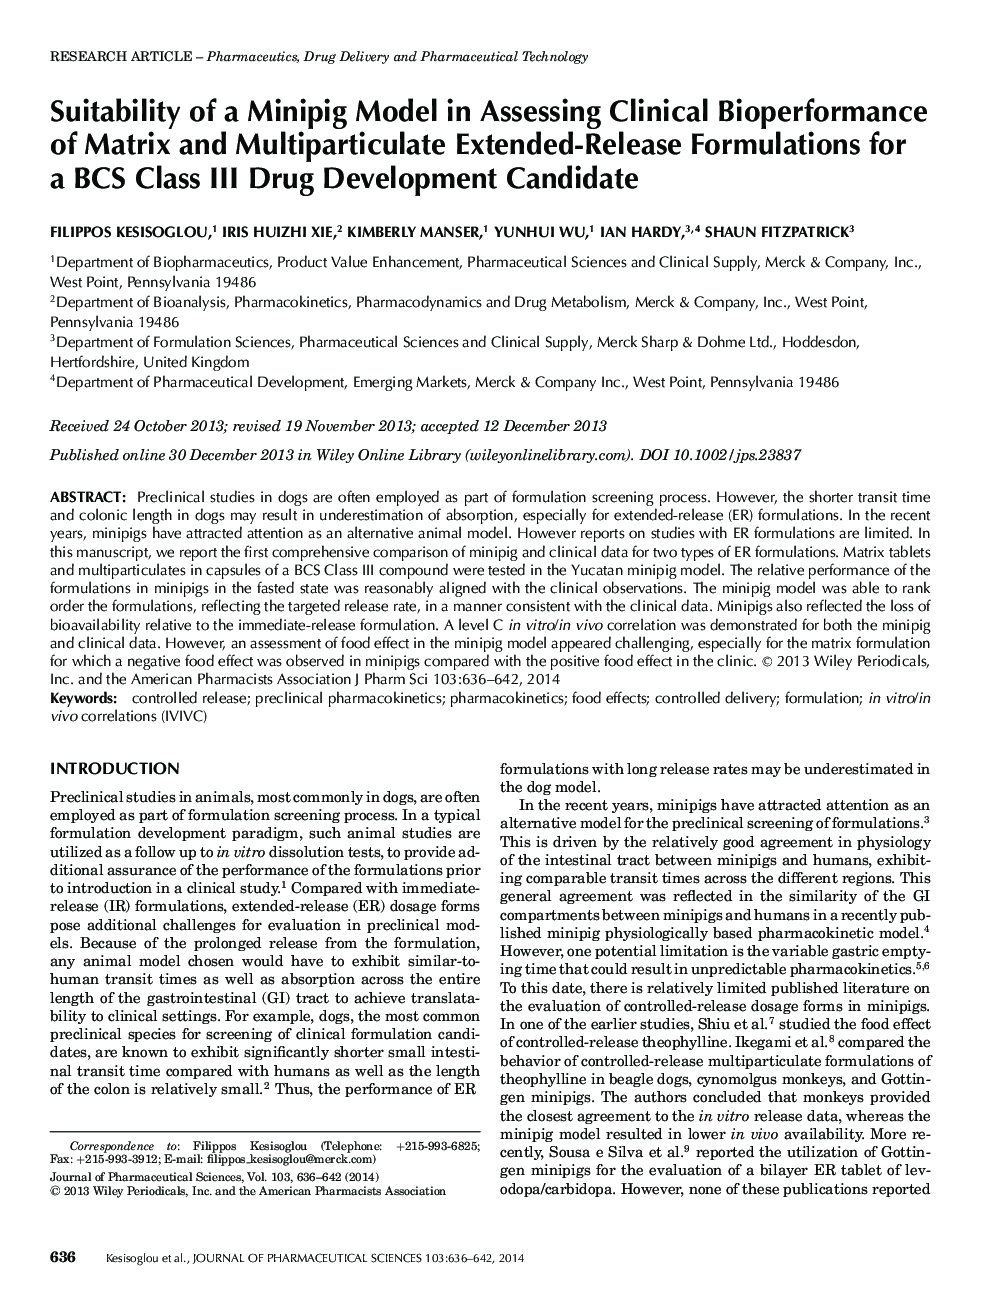 Suitability of a Minipig Model in Assessing Clinical Bioperformance of Matrix and Multiparticulate Extended-Release Formulations for a BCS Class III Drug Development Candidate